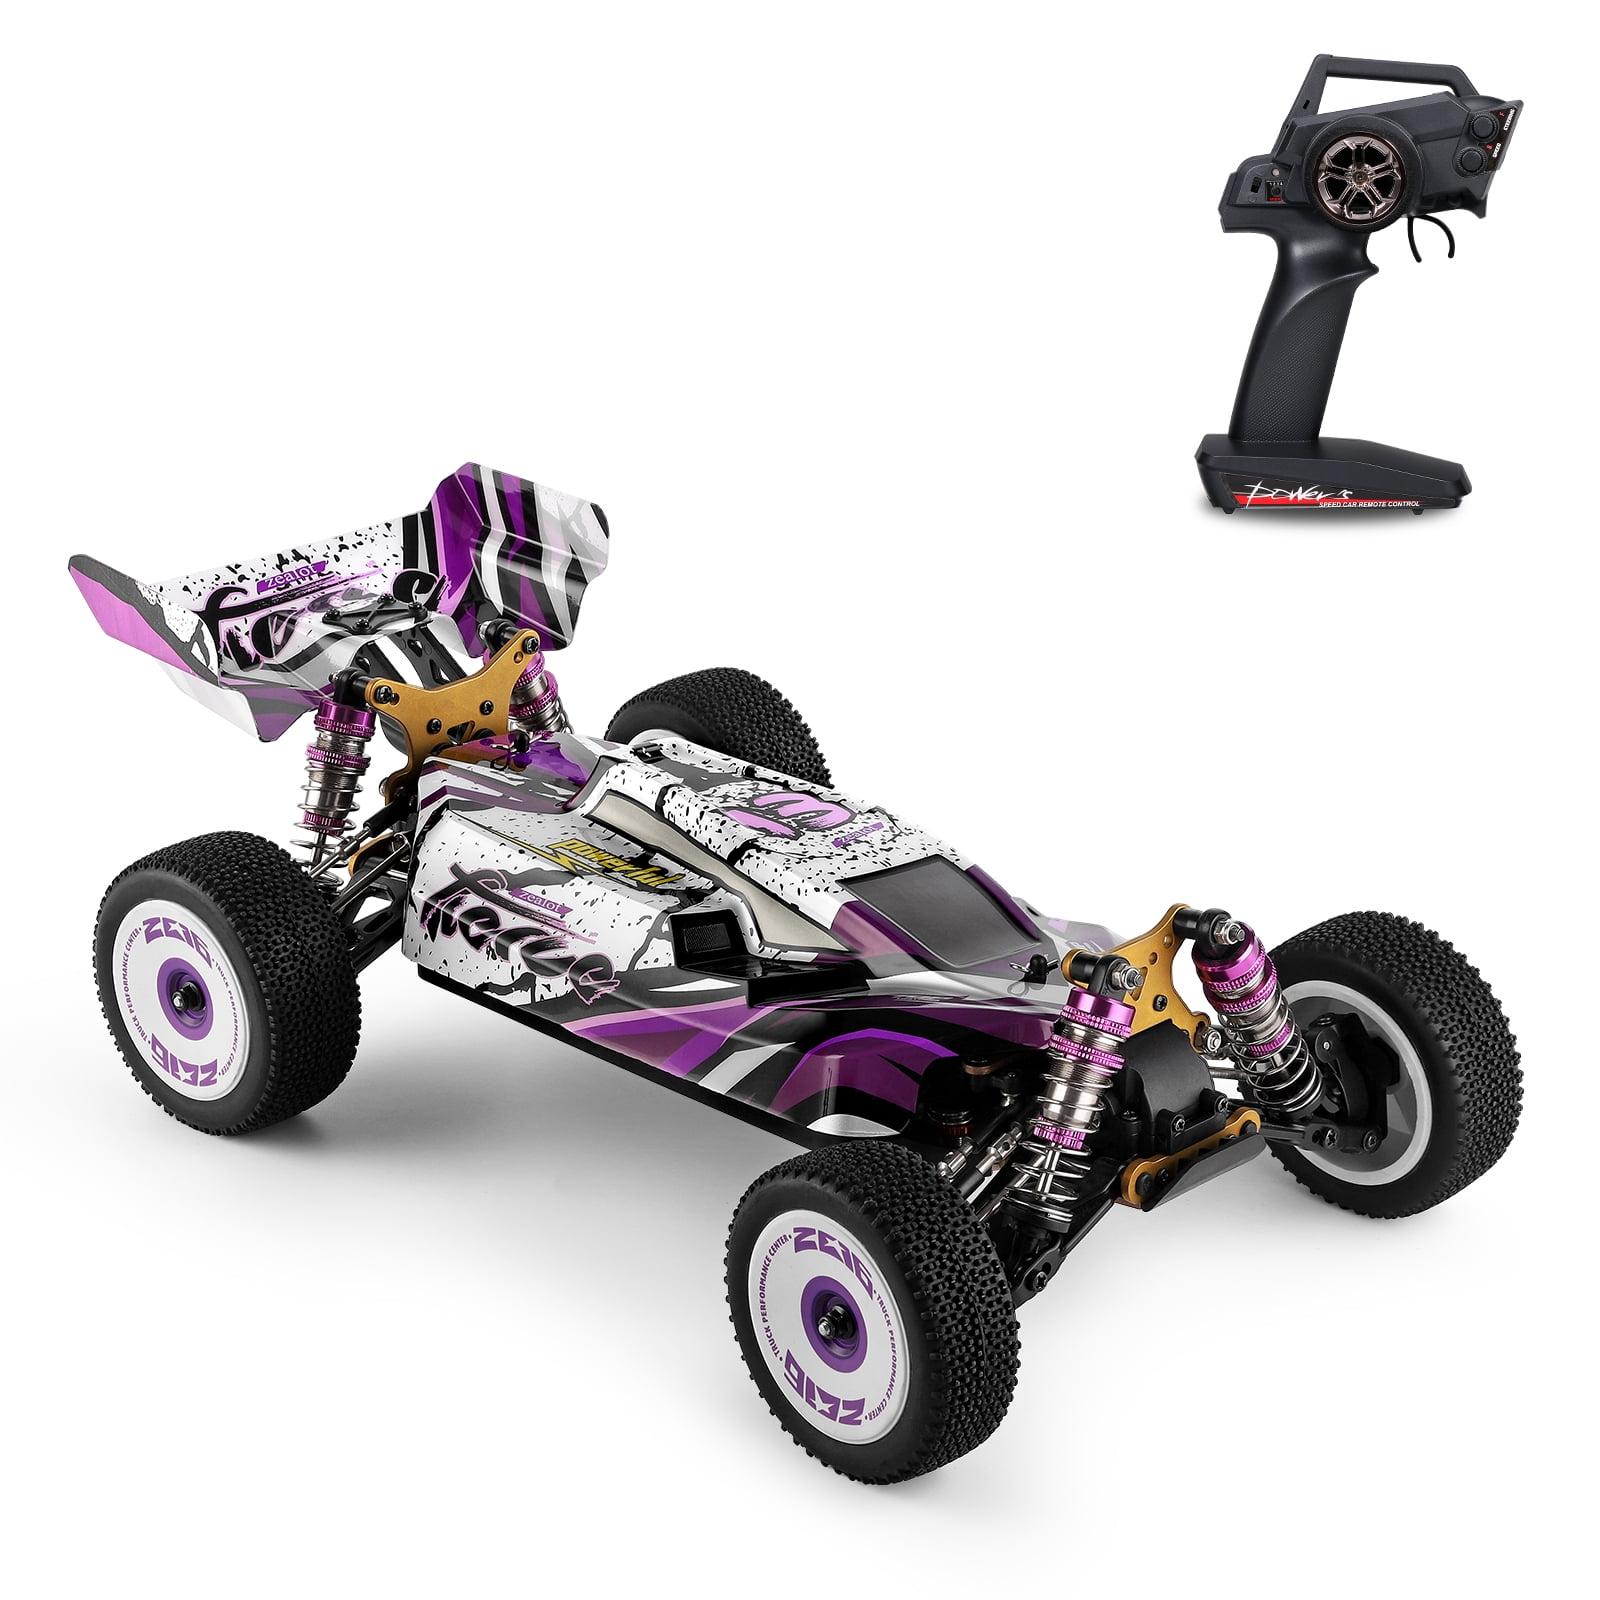 Best Wltoys Rc Car: Valuable Insights from Customer Reviews